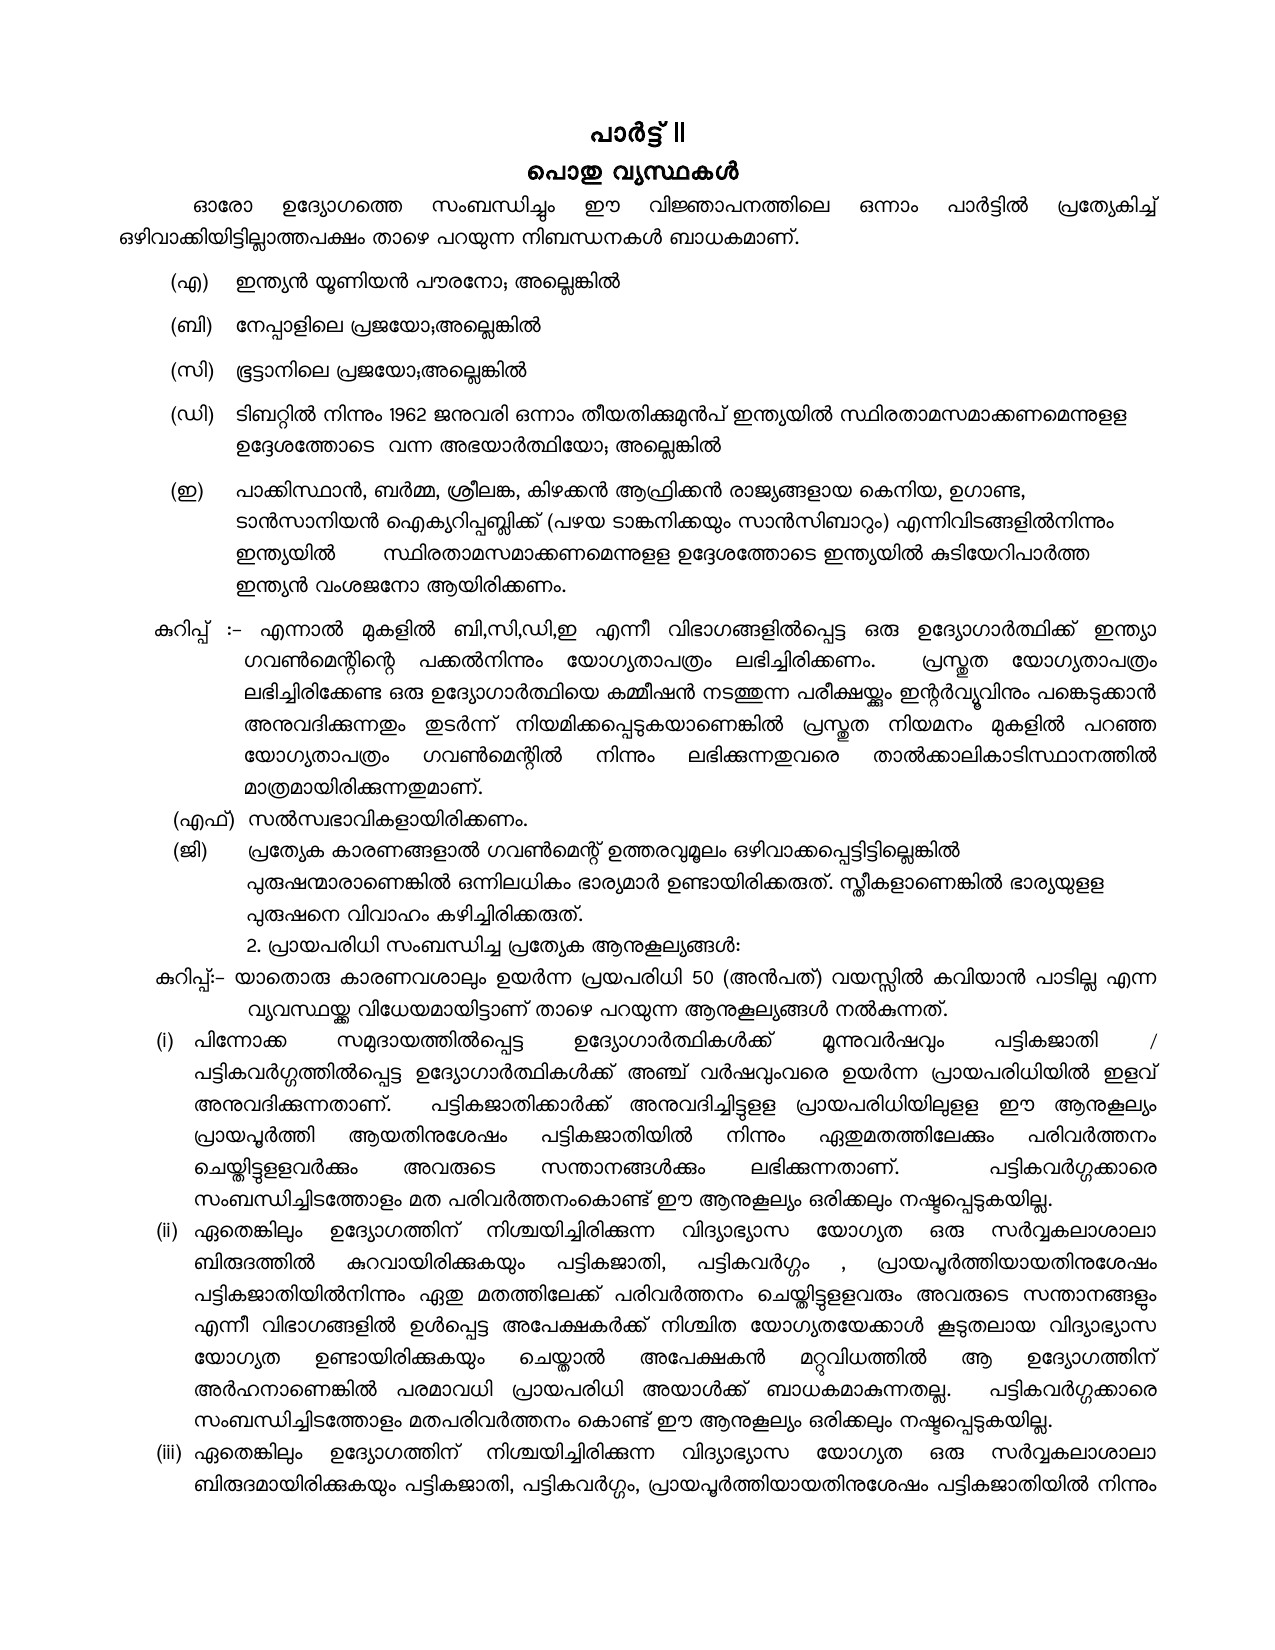 General Conditions and Certificate Formats in Malayalam - Notification Image 1